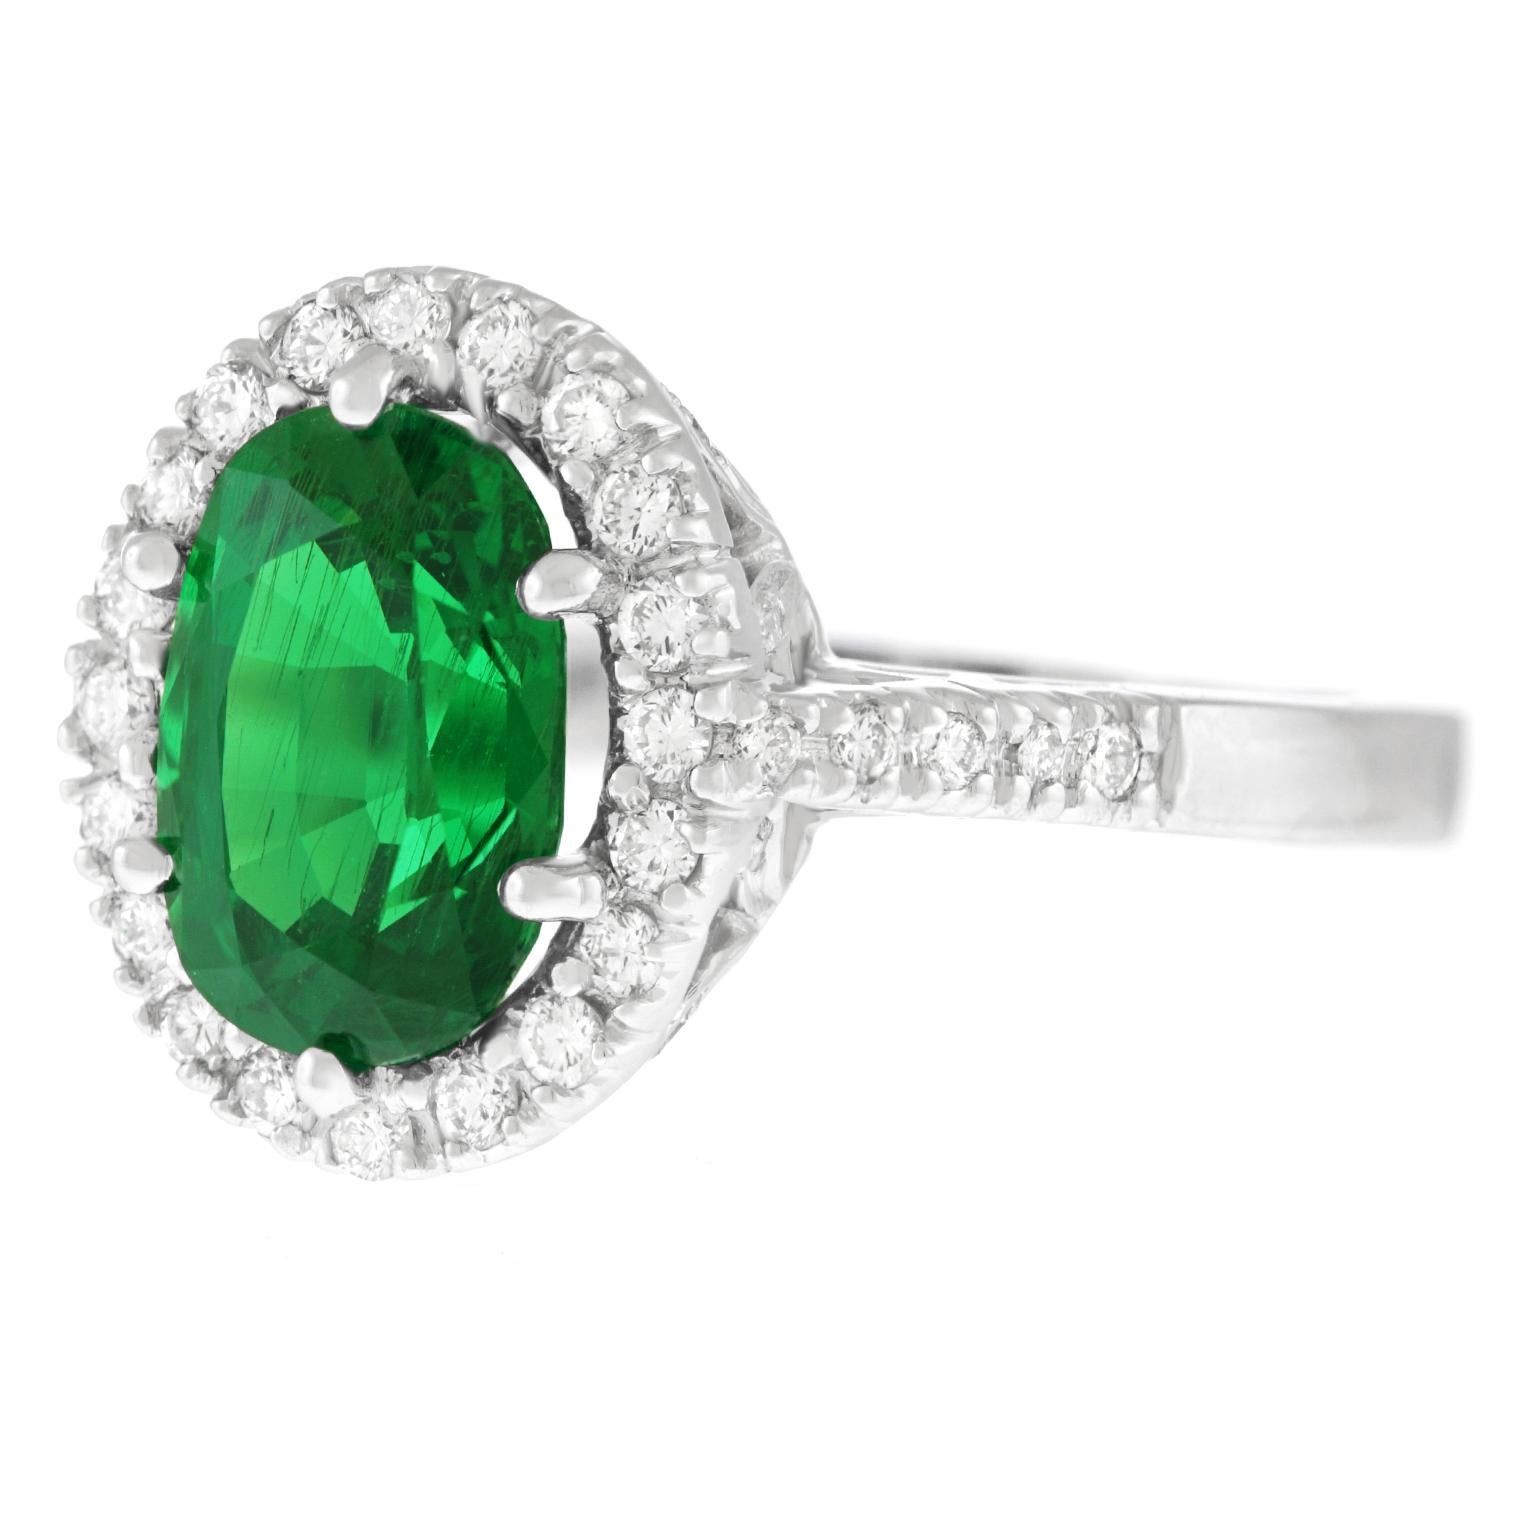 Circa 2000, 18k, American.  This gorgeous ring perfectly balances timeless elegance with contemporary style. Its vibrant 3.00 carat tsavorite garnet is surrounded by 1.0 carats total weight of brilliant white diamonds (G color, VS clarity).